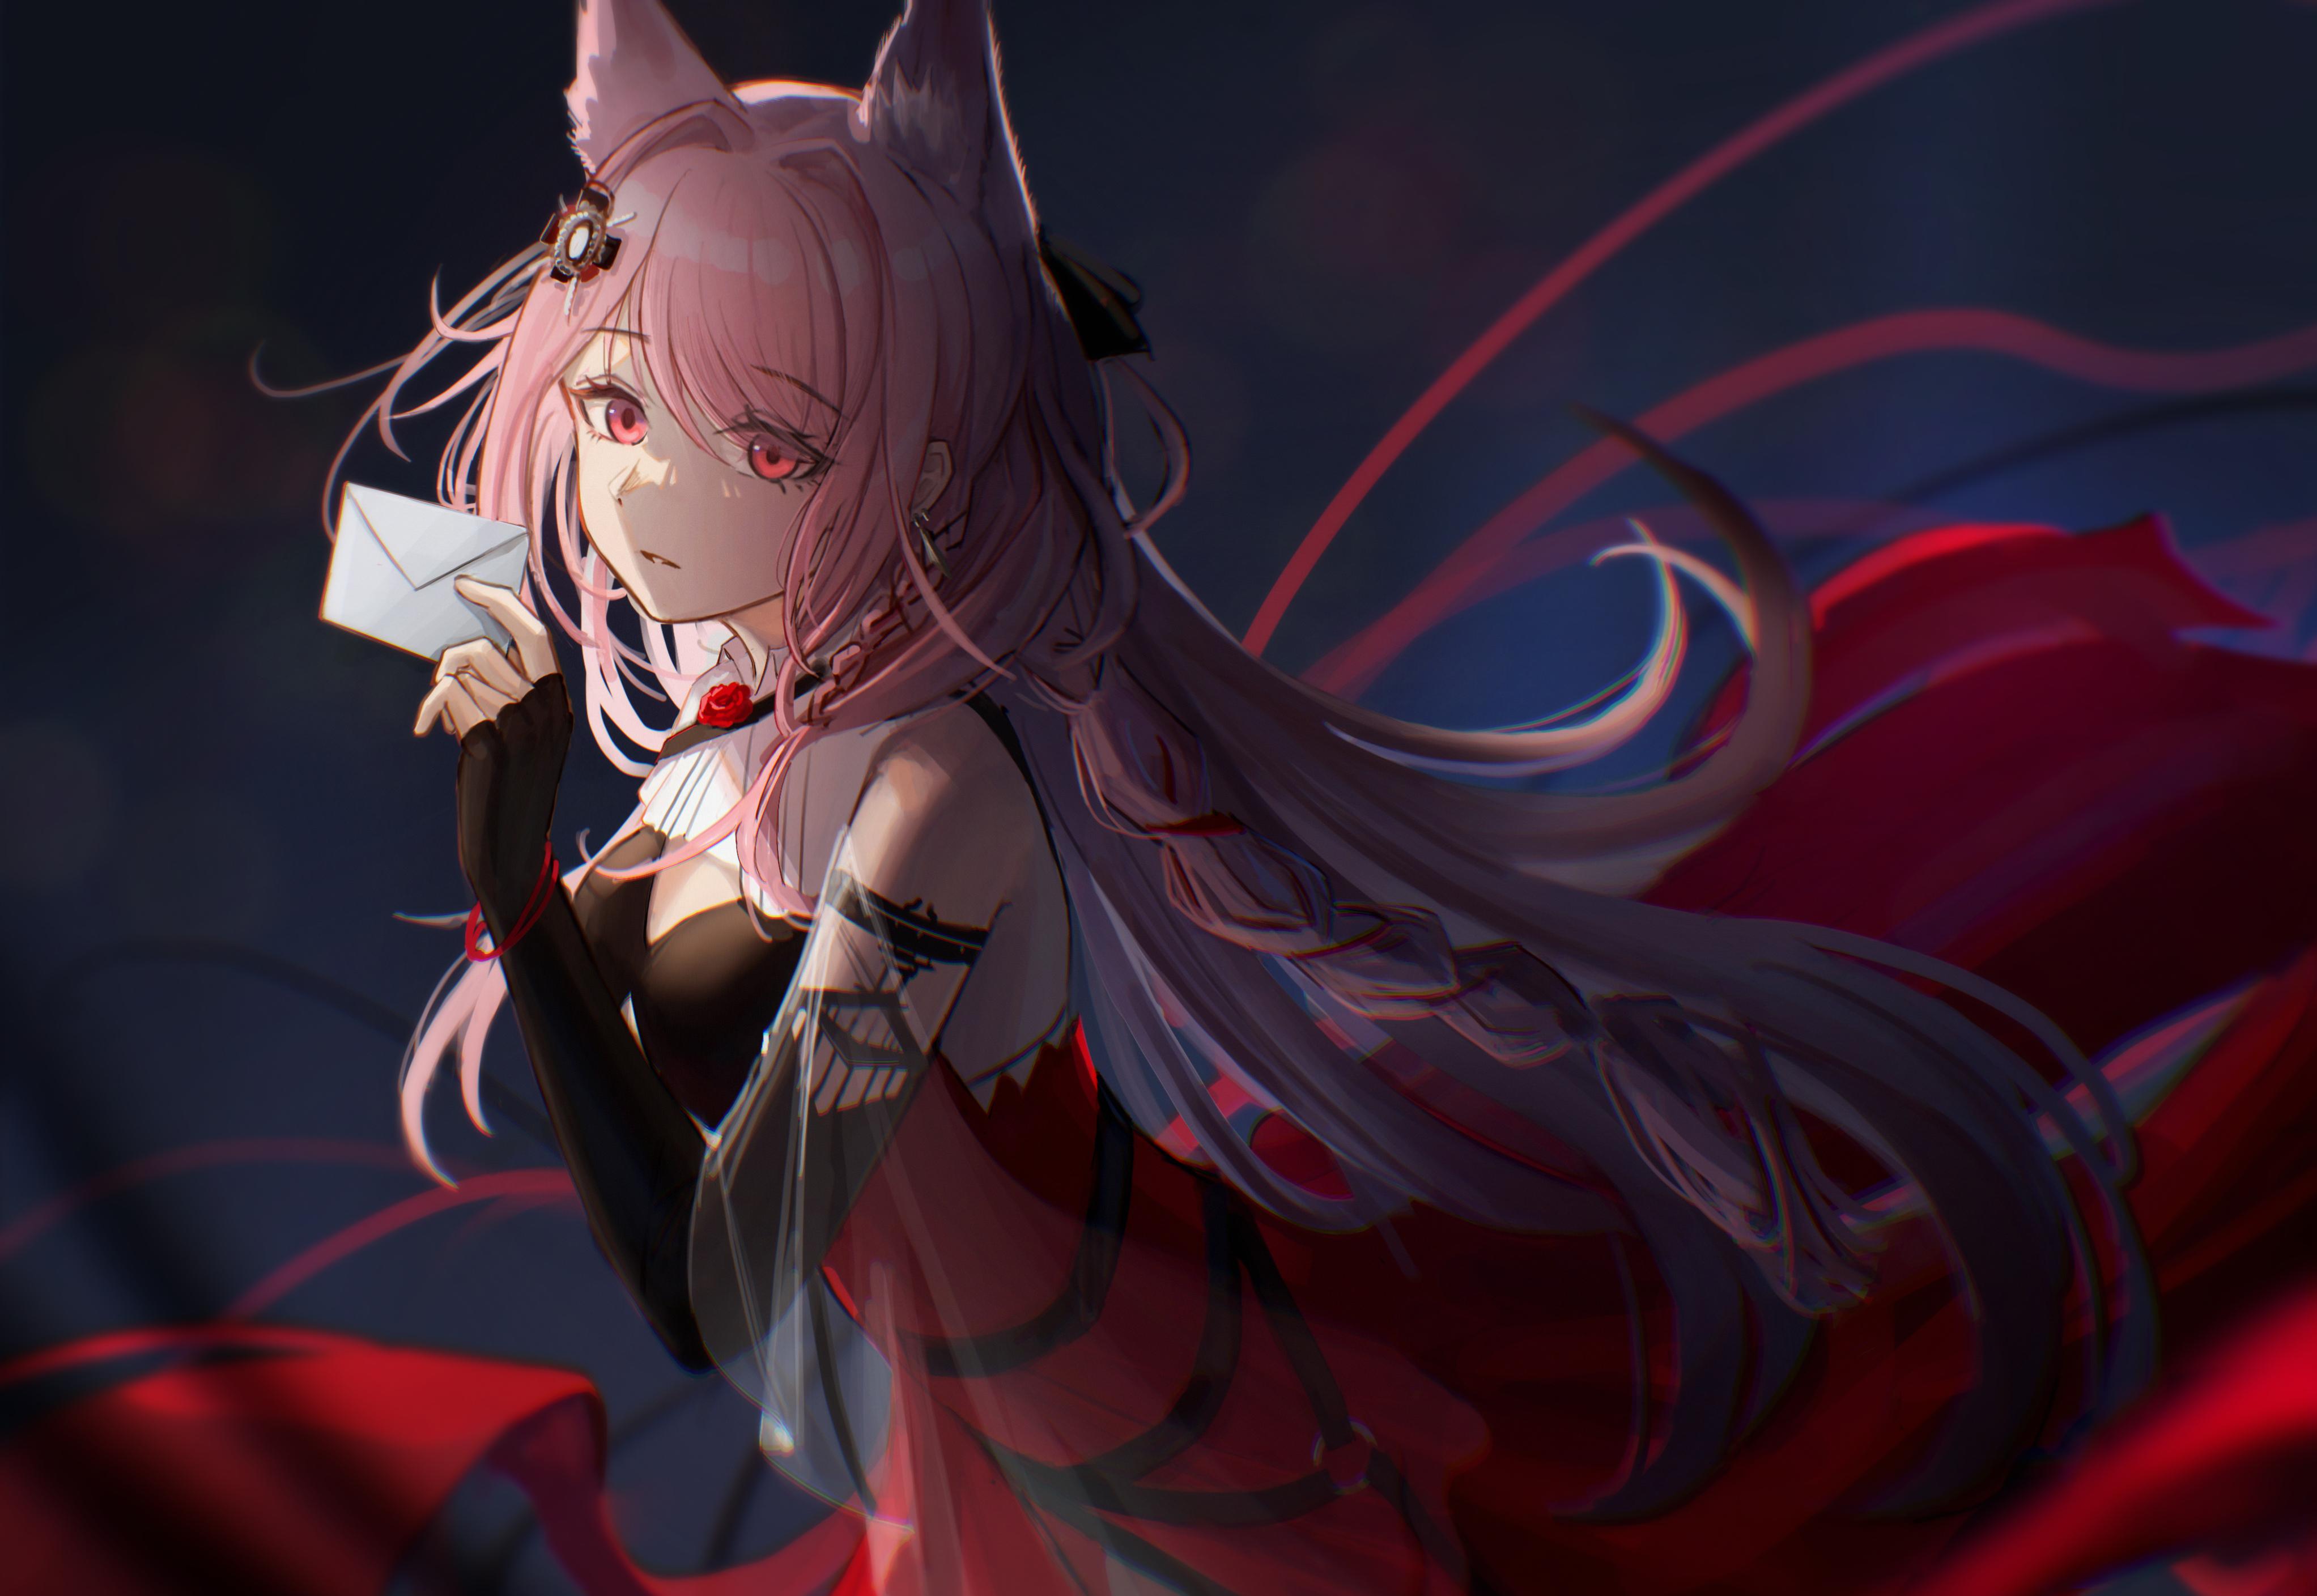 Anime 4089x2817 anime anime girls pink hair pink eyes opera gloves red dress Arknights tararelux letter Pixiv Pozёmka (Arknights)